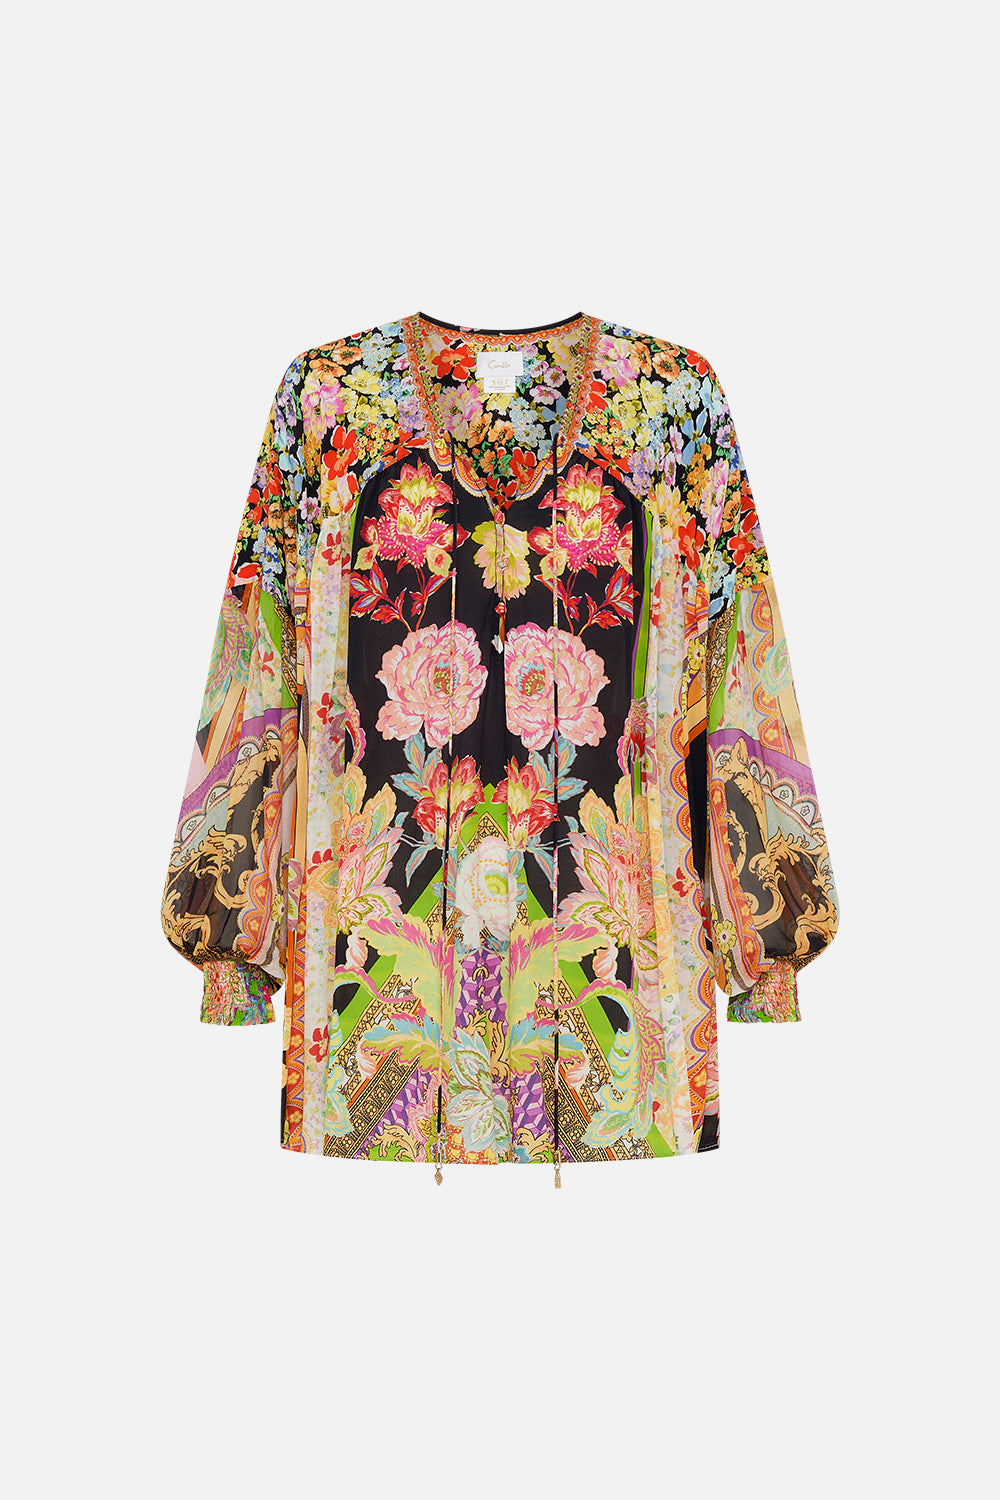 Product view of CAMILLA silk blouse in Sundowners in Sicily print